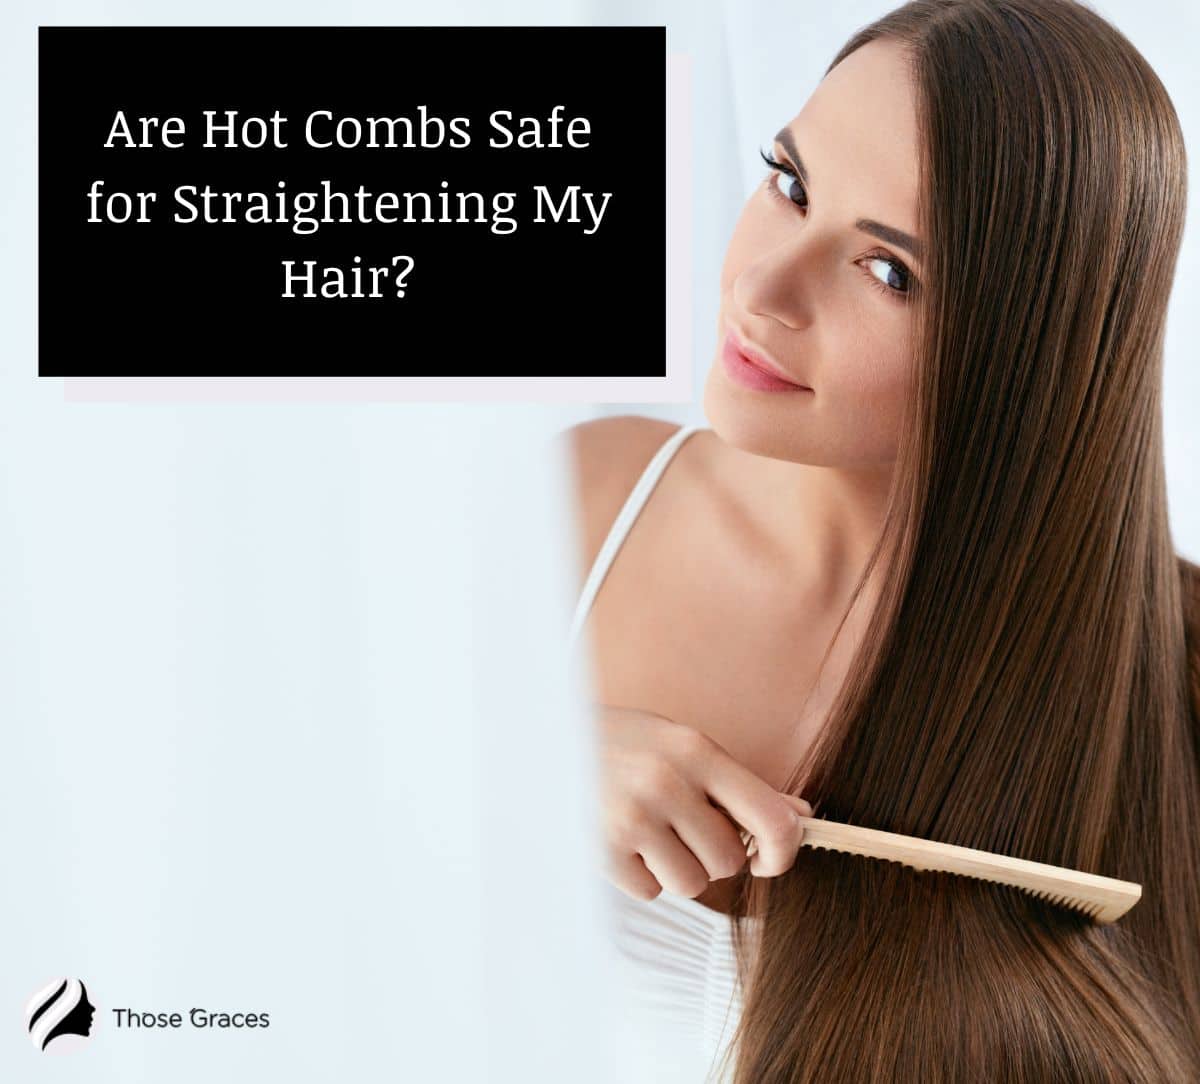 Lady combing her long, straight hair but Are Hot Combs Safe for Straightening My Hair?